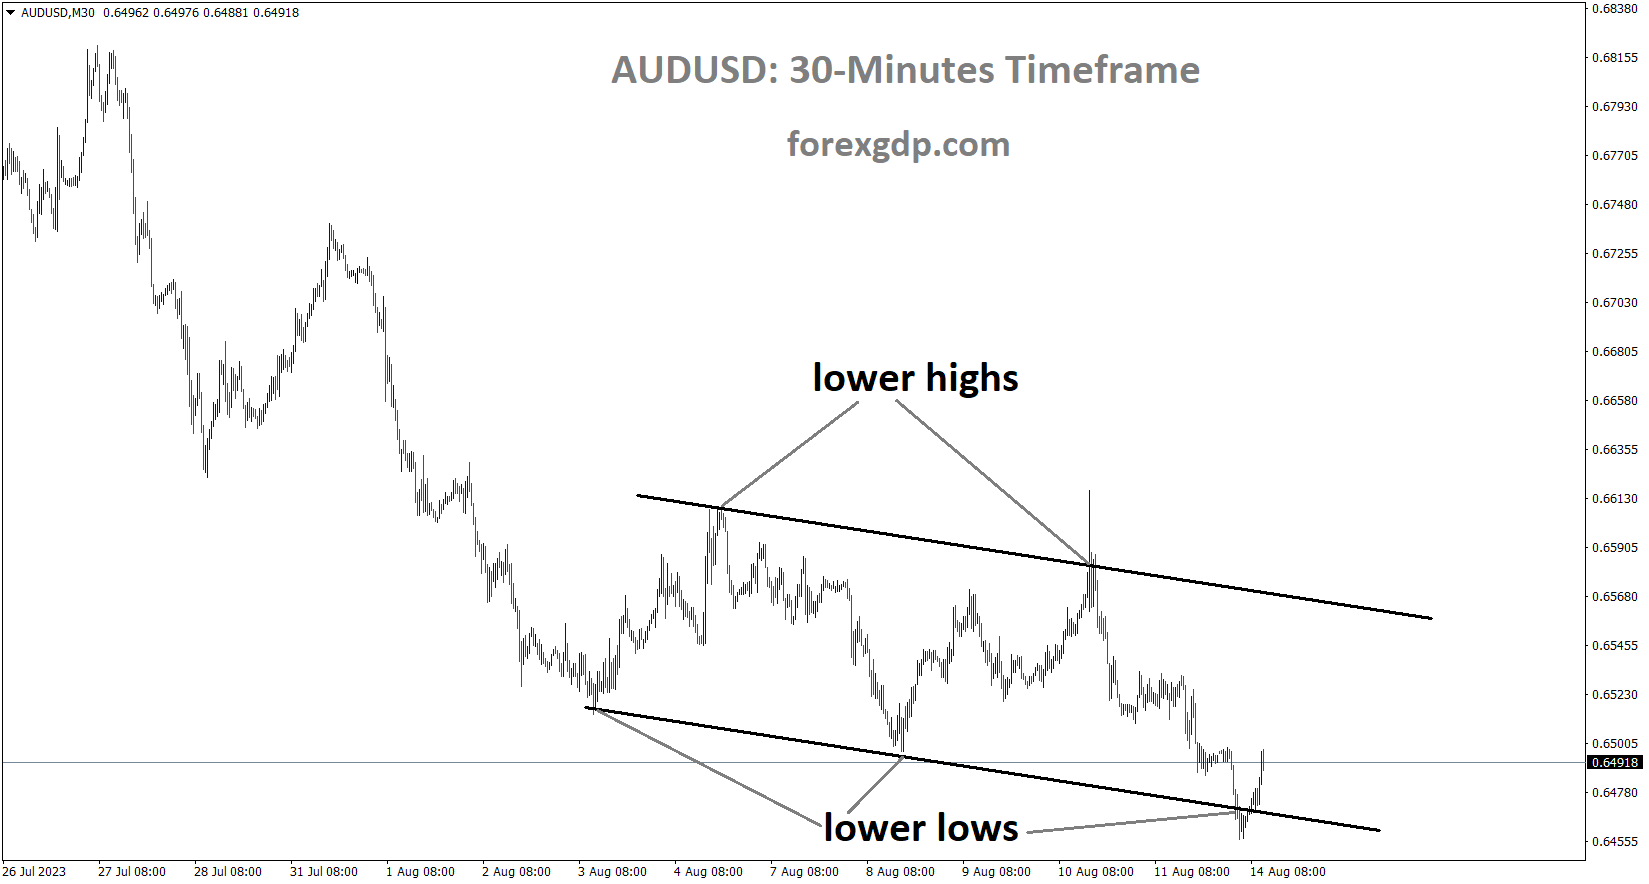 AUDUSD is moving in the Descending channel and the market has rebounded from the lower low area of the channel